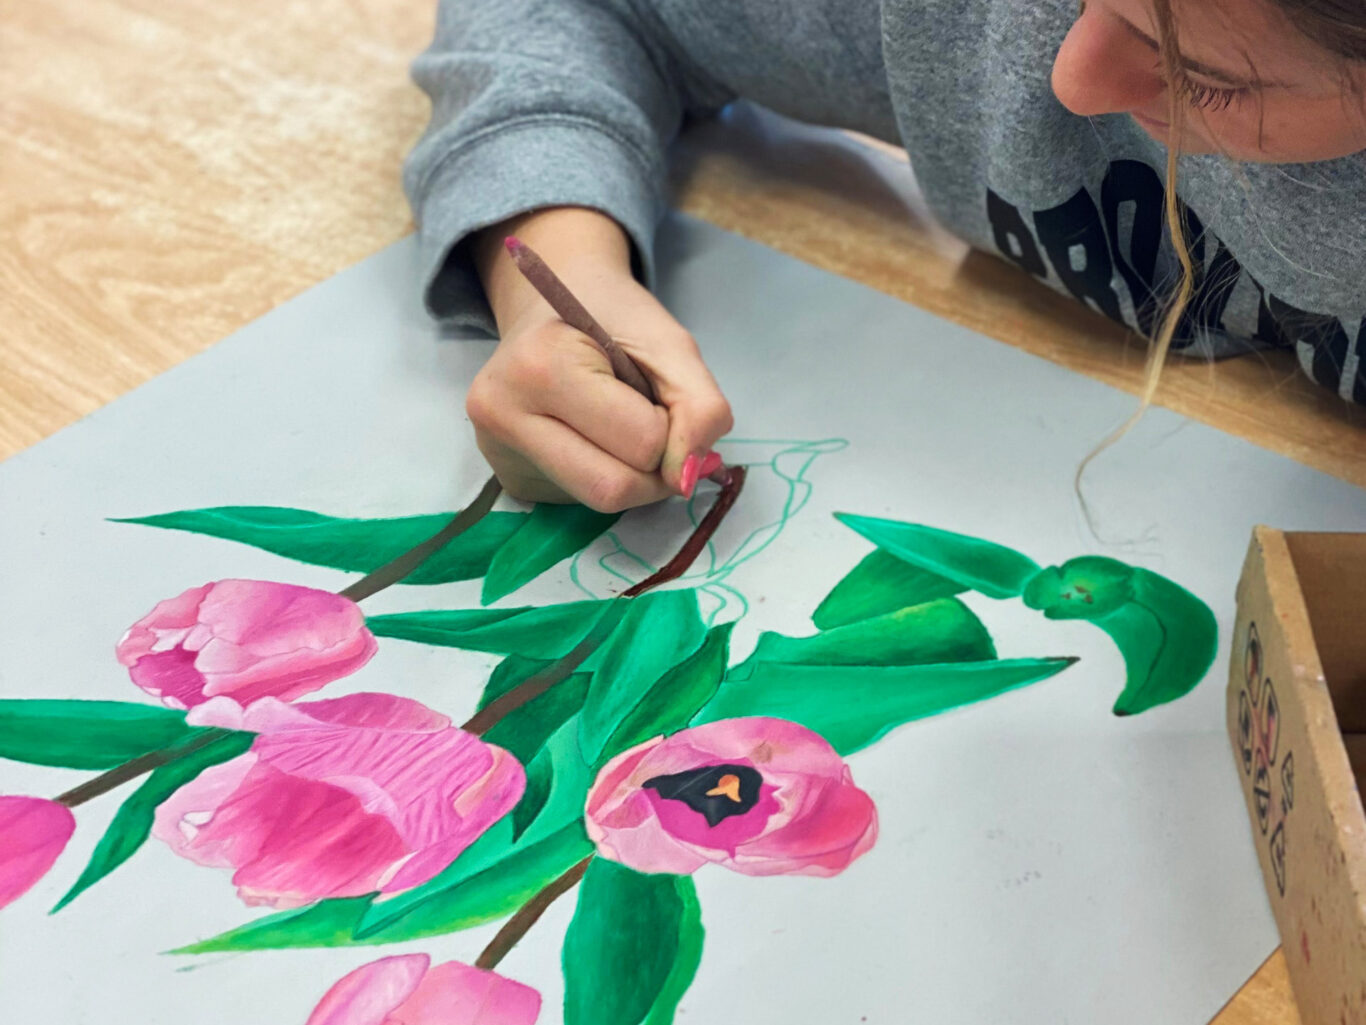 A girl creates visually captivating pink flowers on a piece of paper using her artistic skills in visual arts.